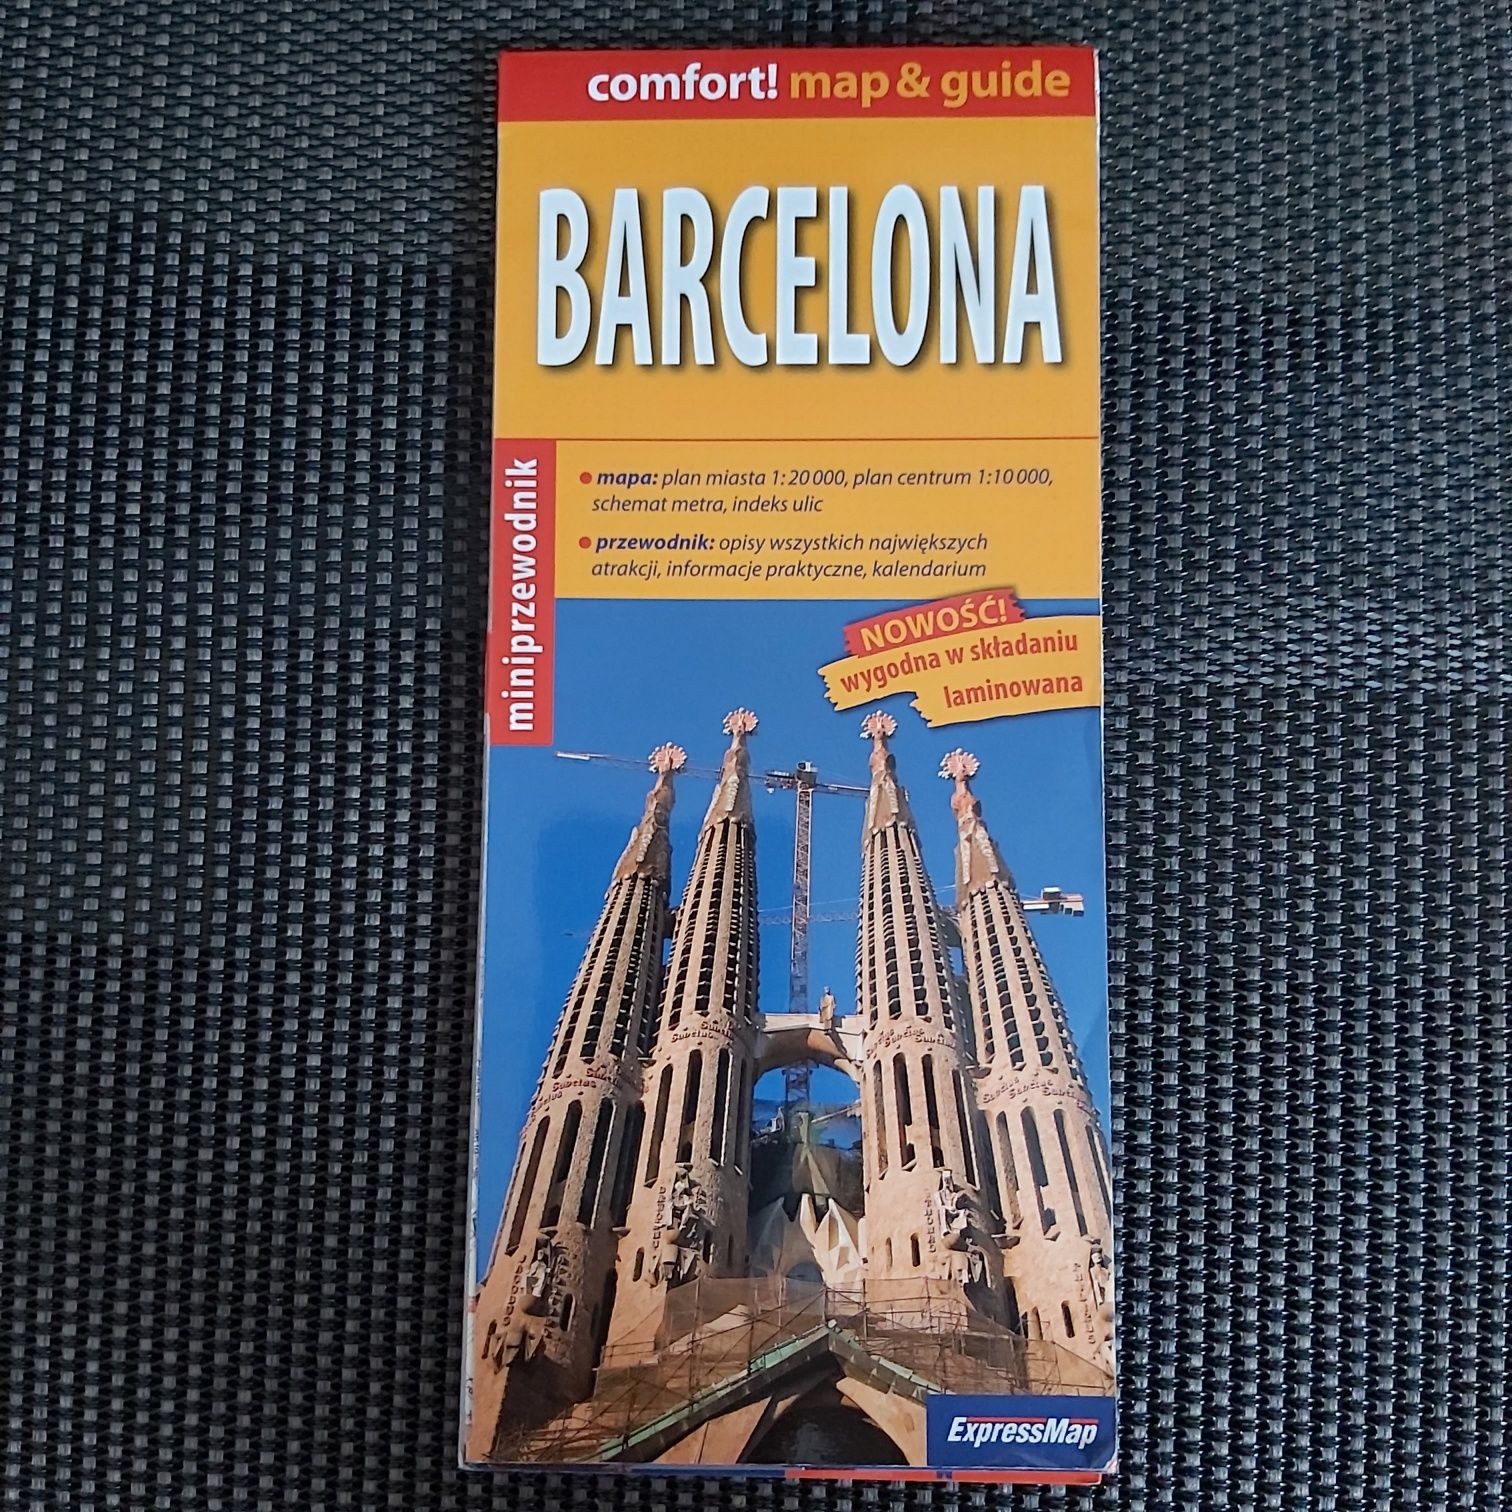 Barcelona comfort map and guide